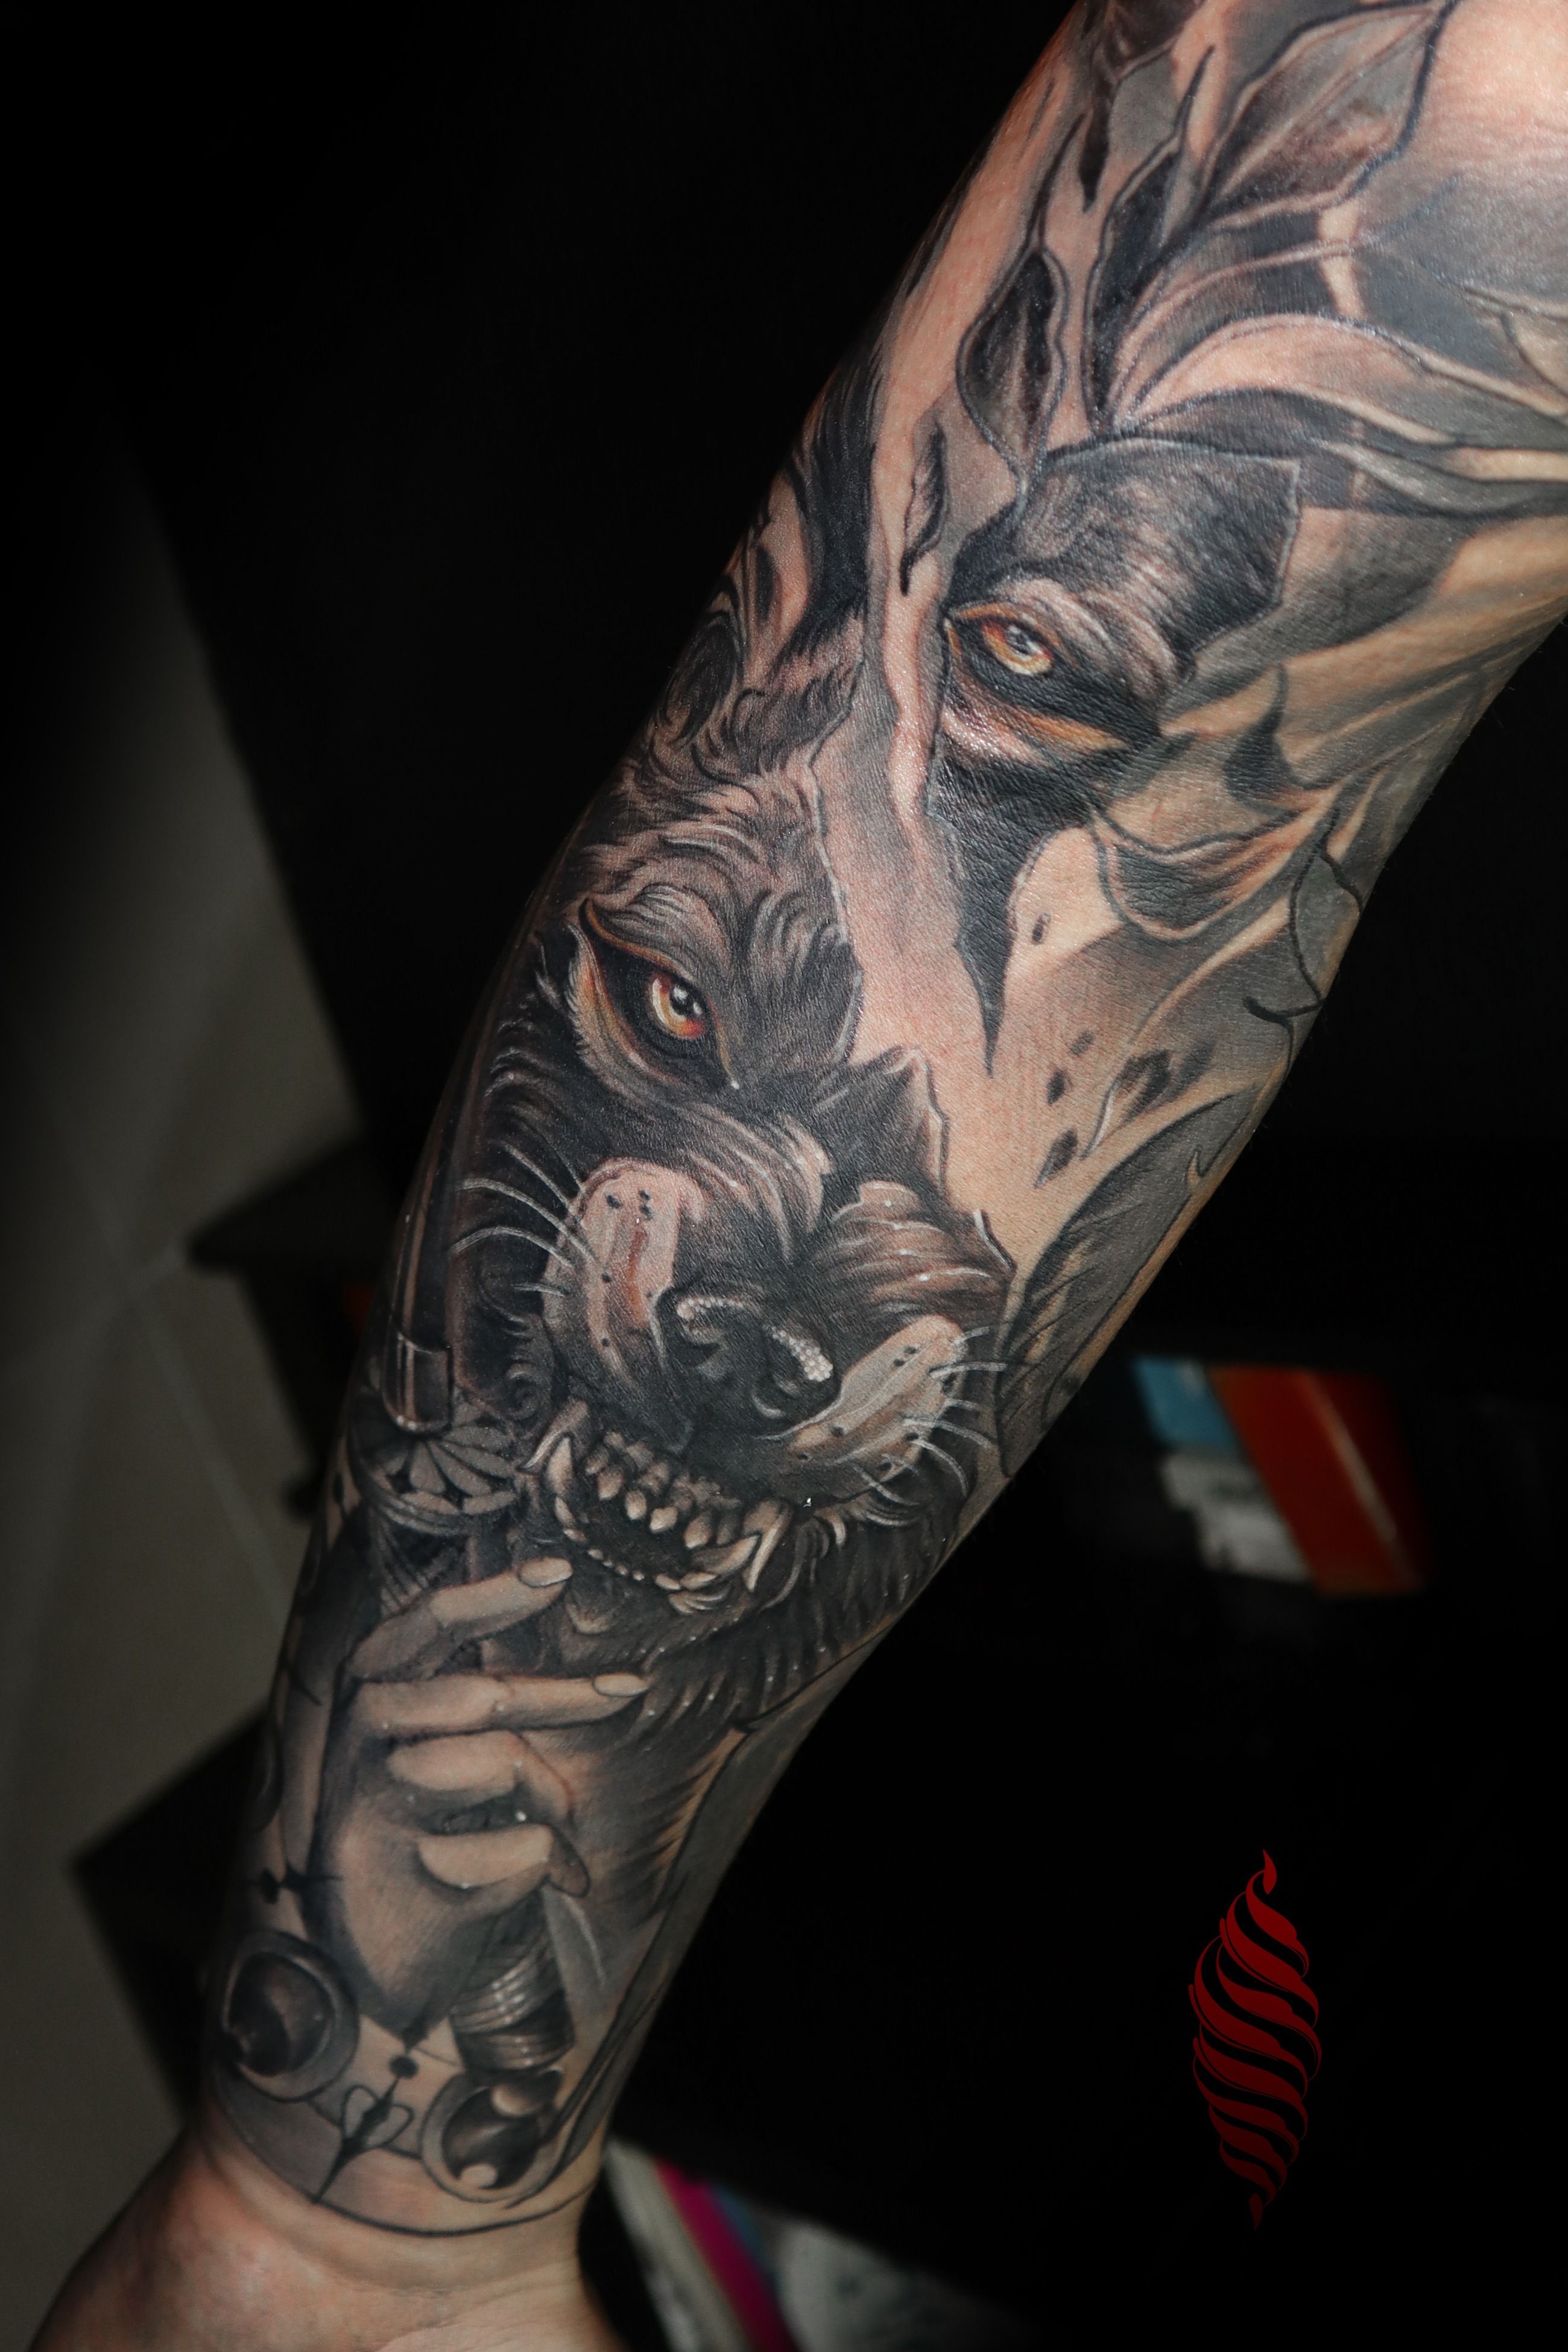 50 Realistic Wolf Tattoo Designs For Men  Canine Ink Ideas